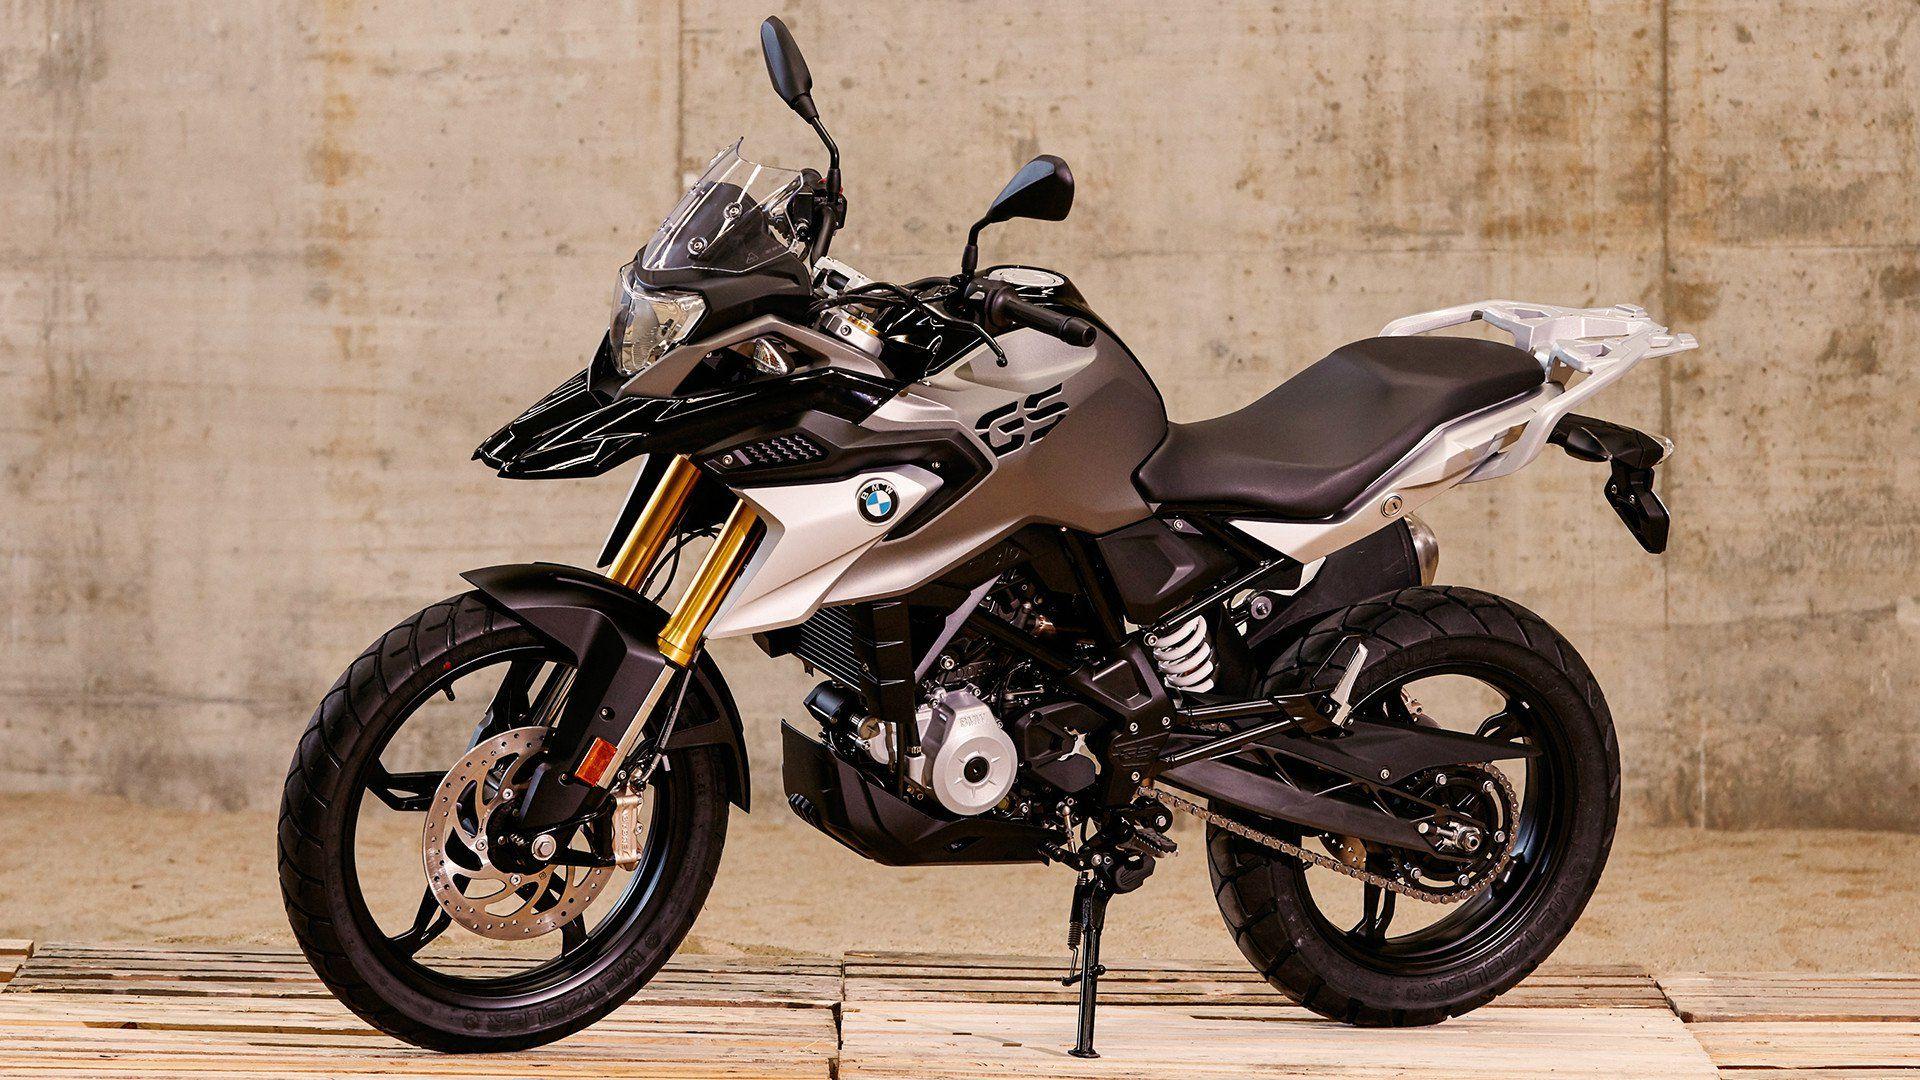 2019 BMW G 310 R / G 310 GS Picture, Photo